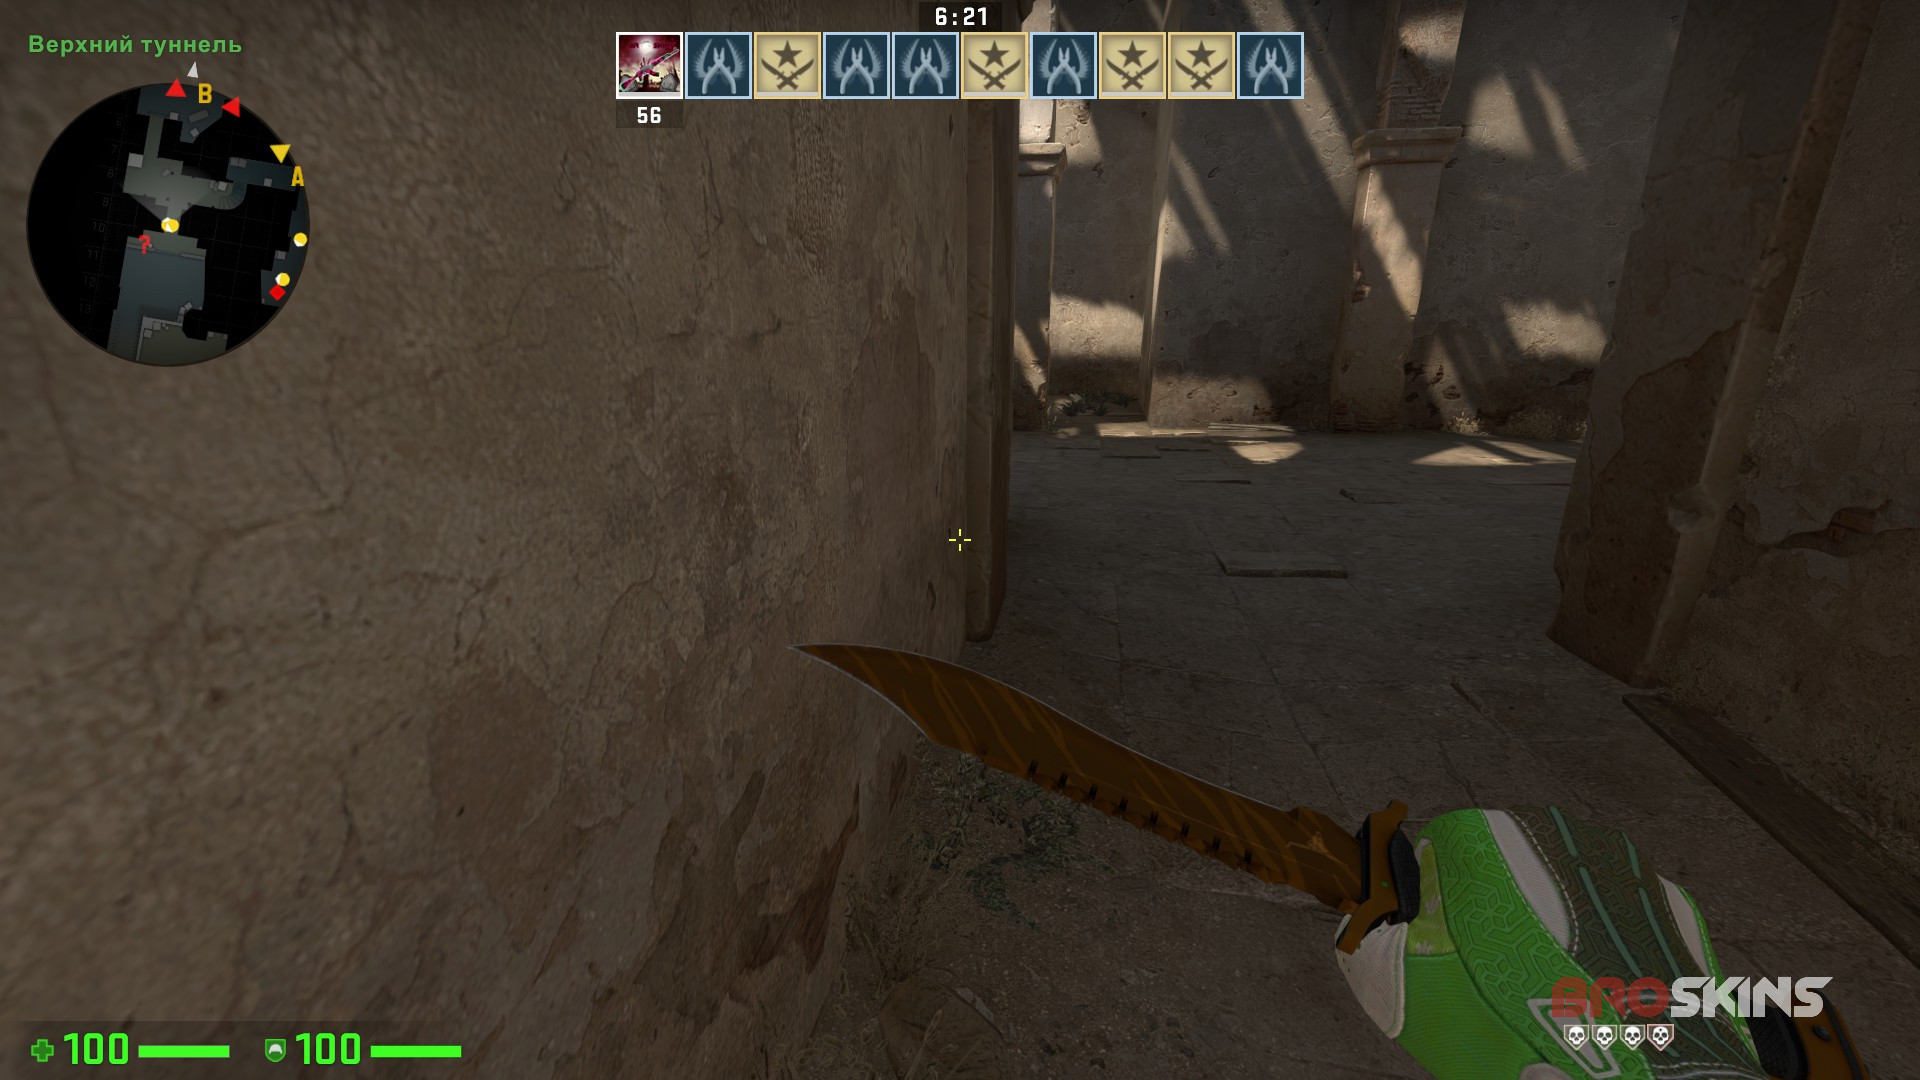 Bowie Knife Tiger Tooth + Sport Gloves Hedge Maze